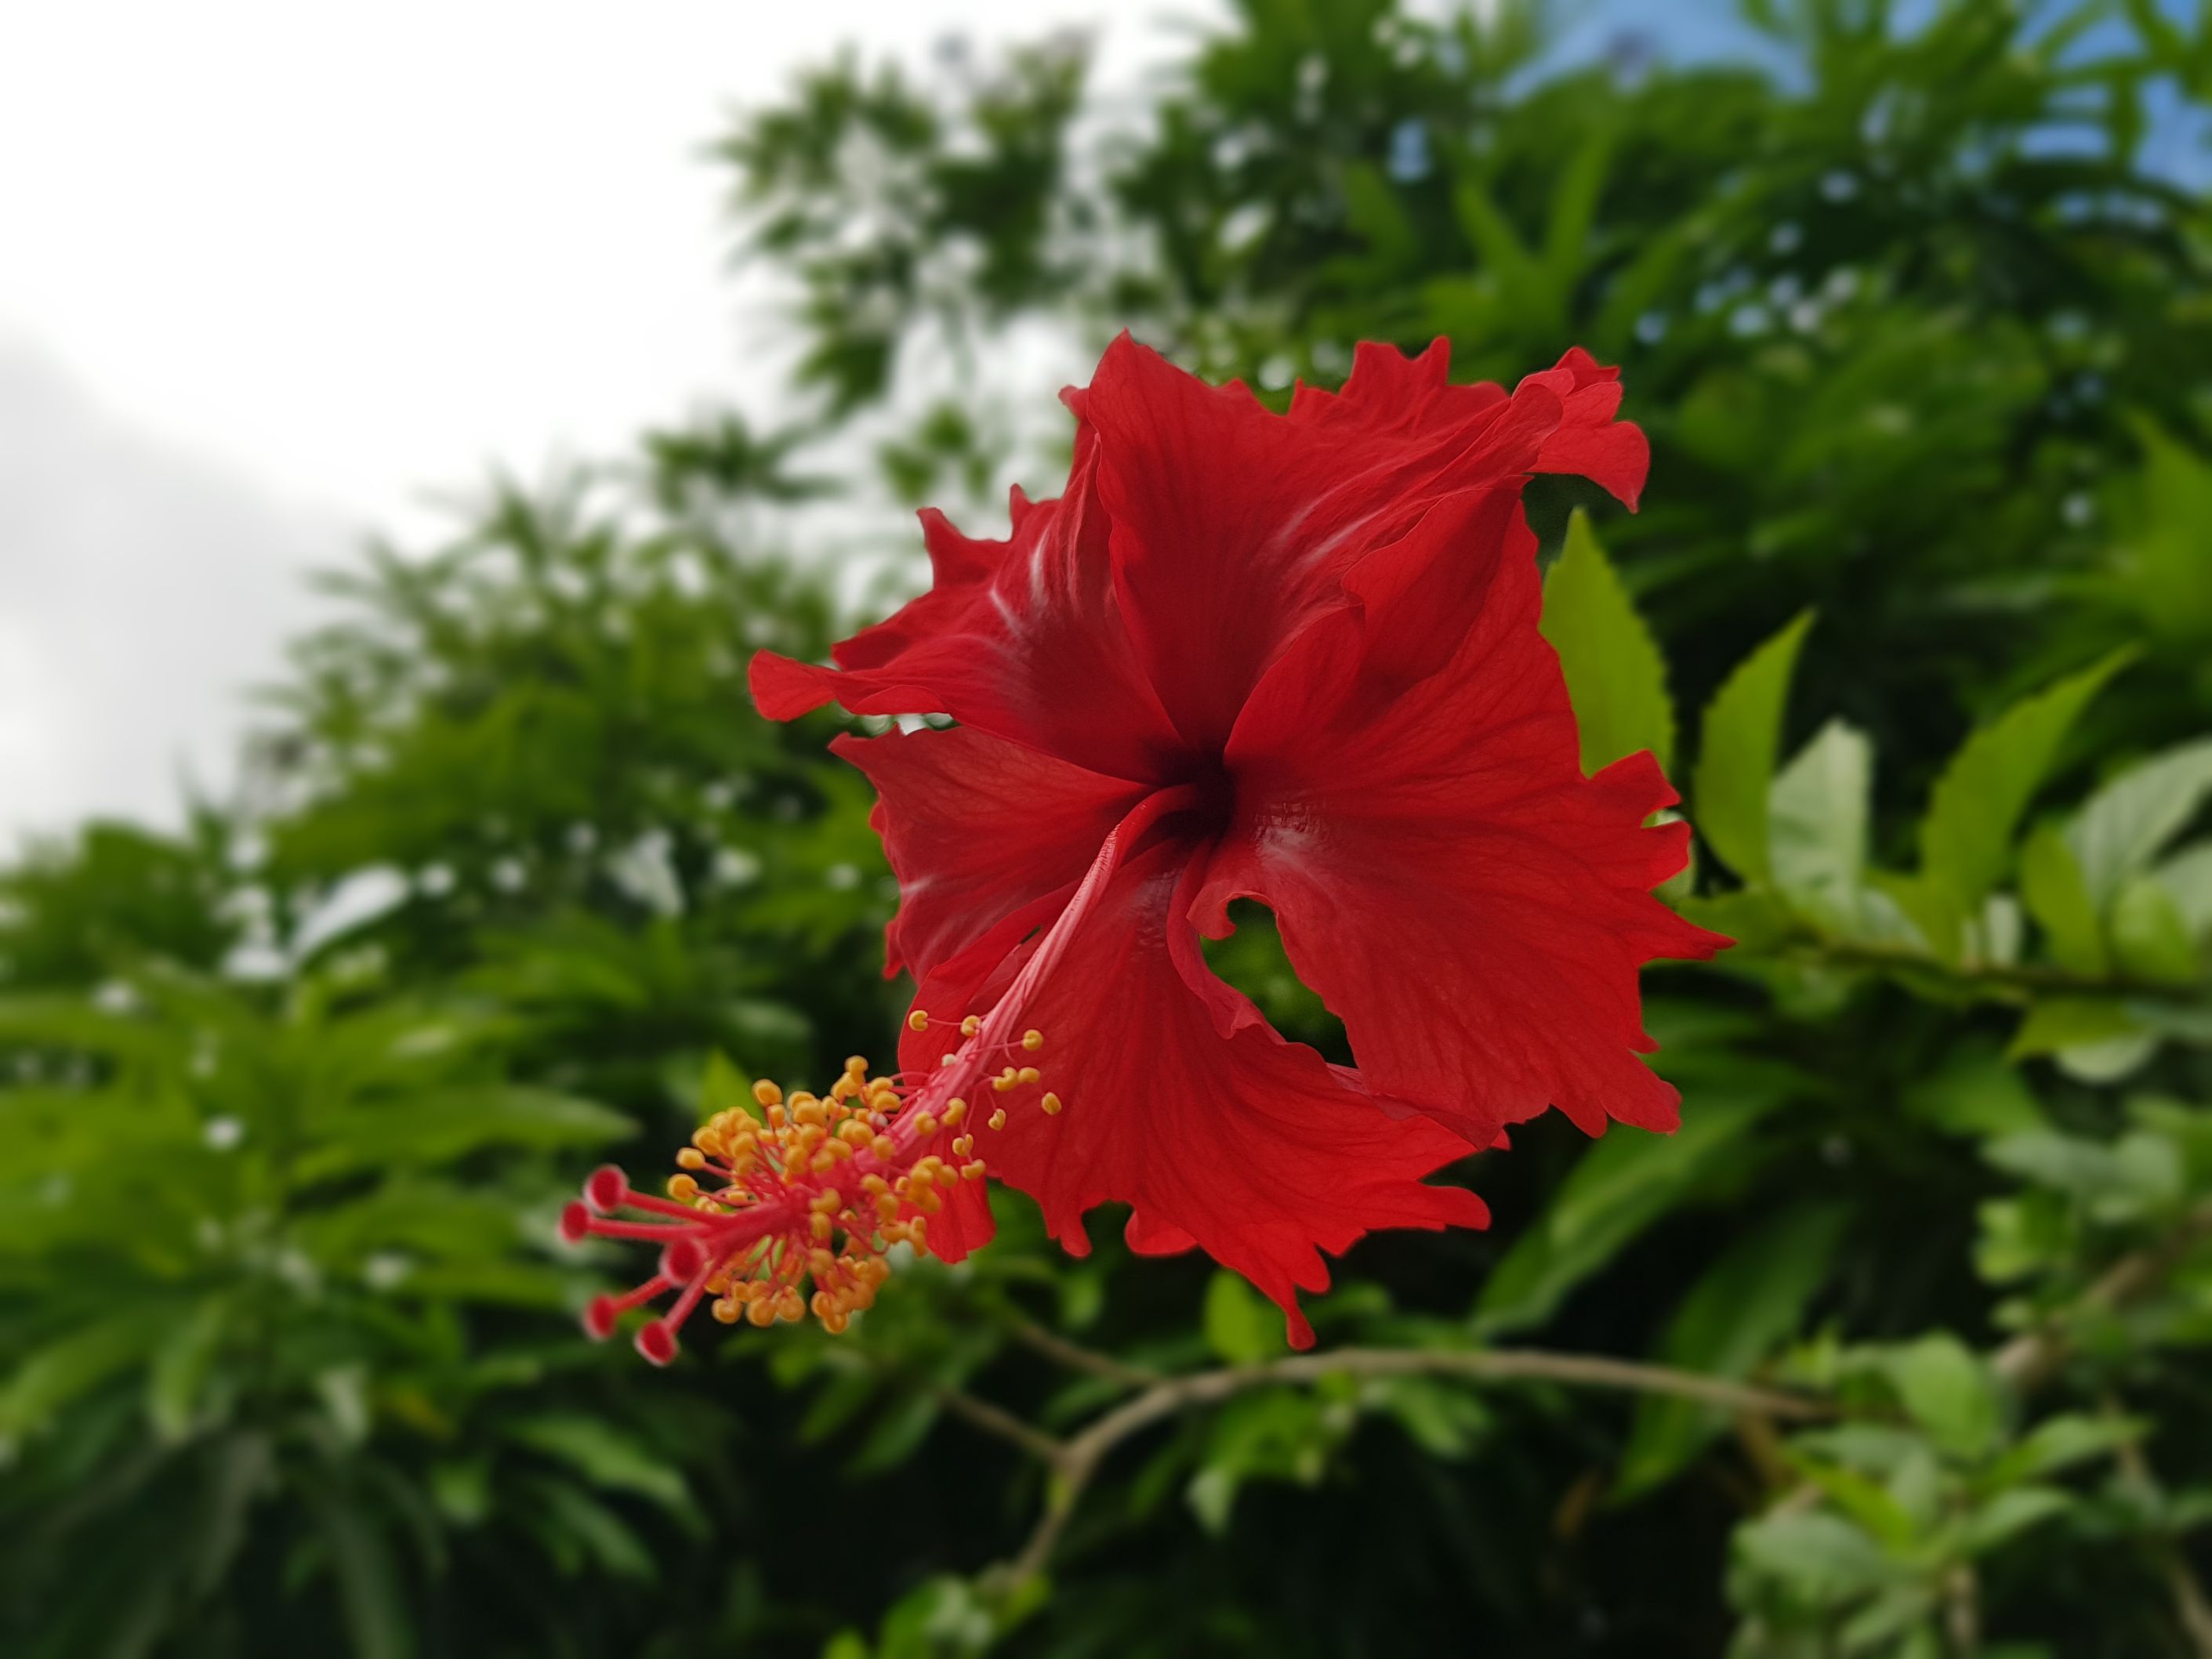 File:Flor Tropical.jpg - Wikimedia Commons